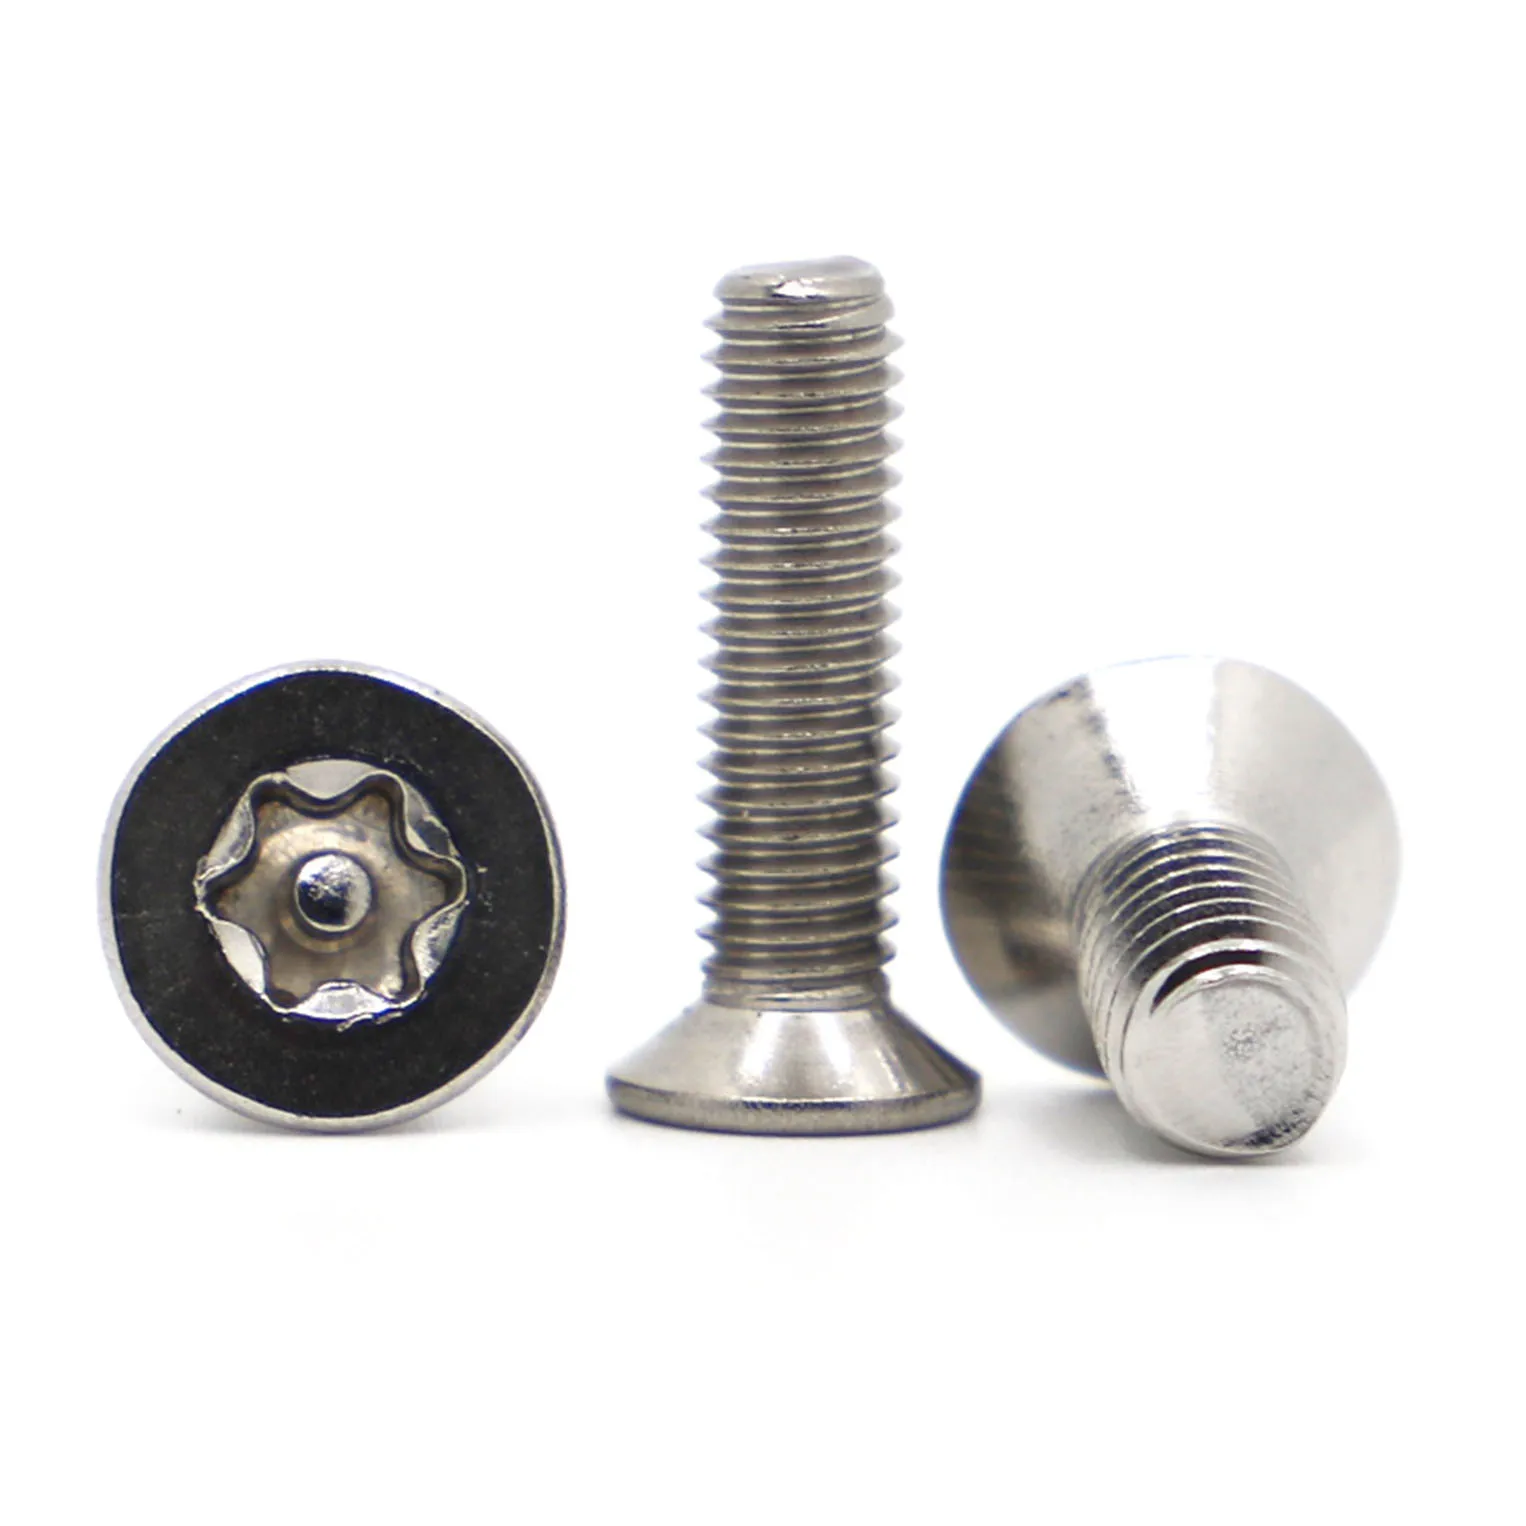 

304 Stainless Steel Six Lobe Torx Countersunk Flat Head with Pin Tamper Proof Anti Theft Security Screw Bolt M2 M2.5 M3 M4 M5 M6